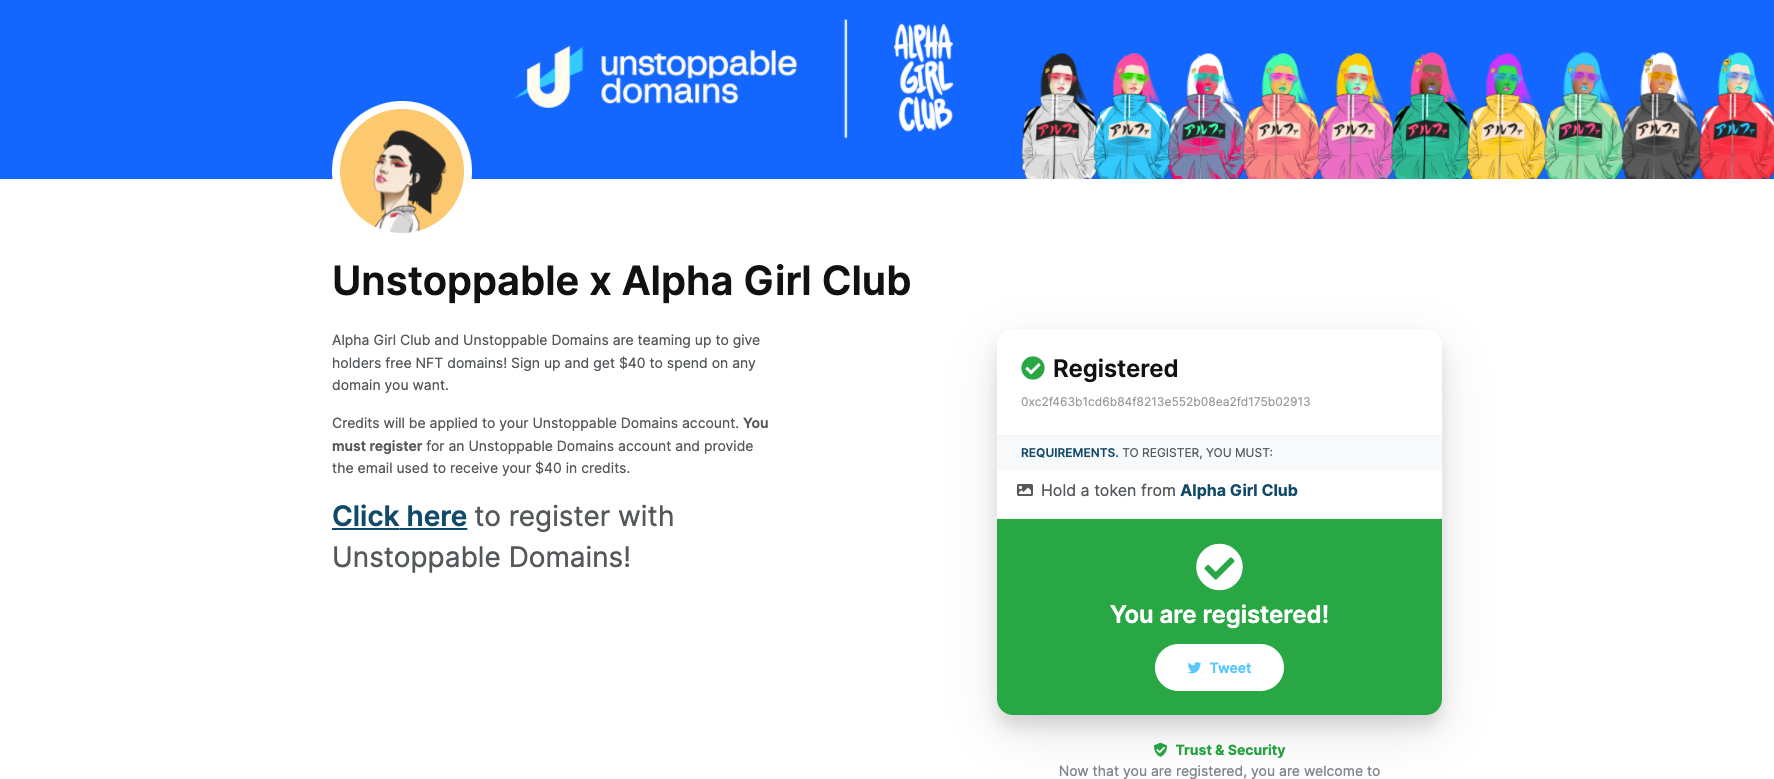 Alpha Girl Club partners with Unstoppable domains to offer free domains to holders